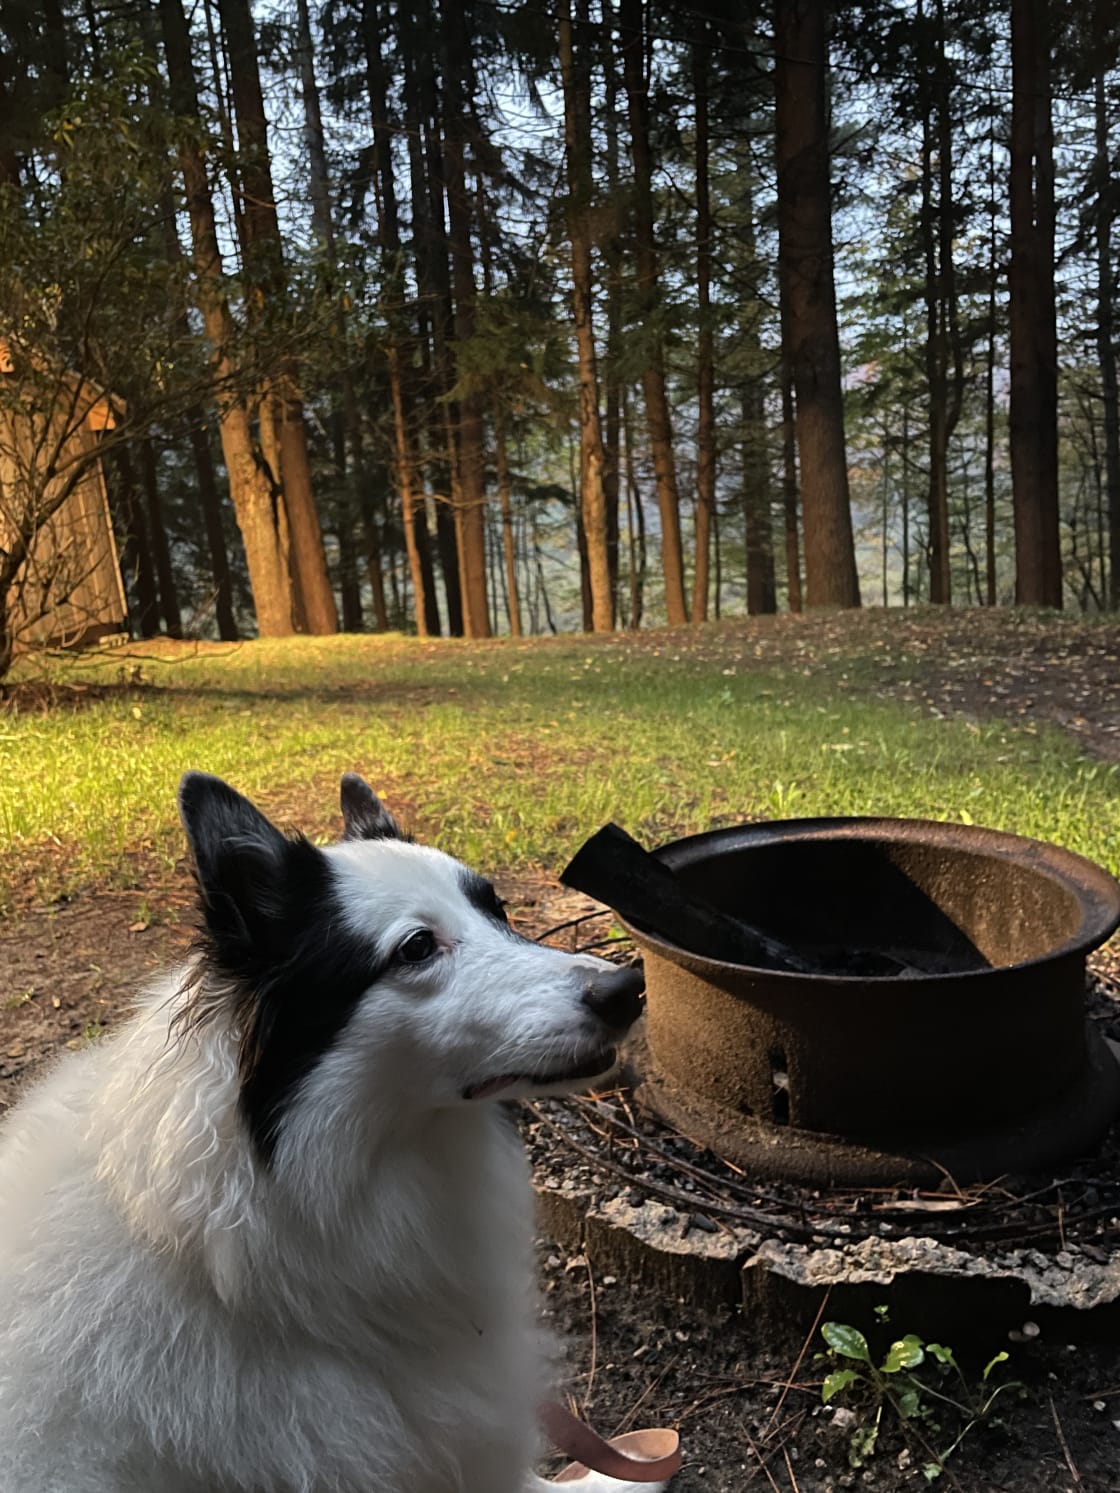 My dog enjoying the scenery and nature sounds outside by the fire ring